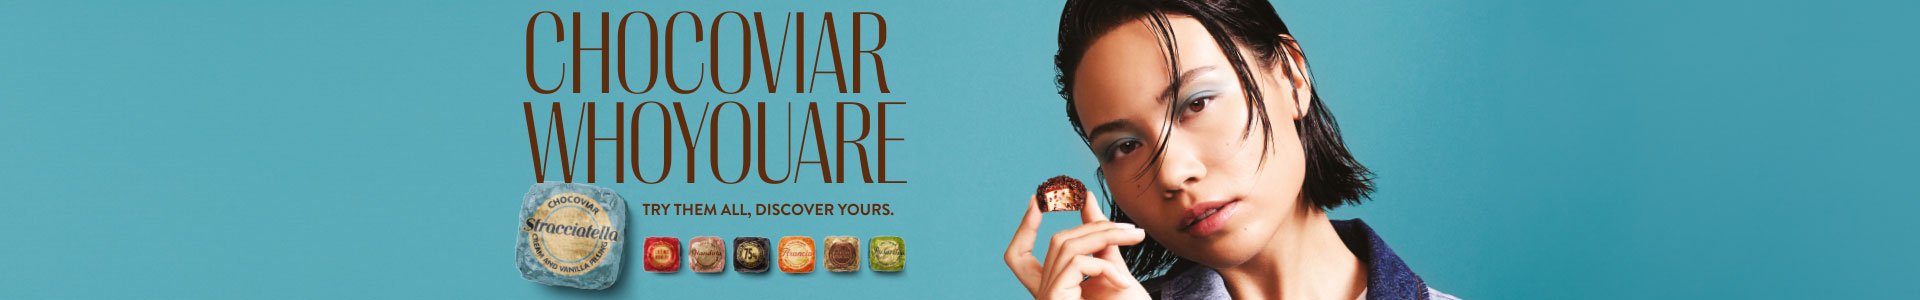 Chocoviar Whoyouare Venchi - Try them all, discover yours